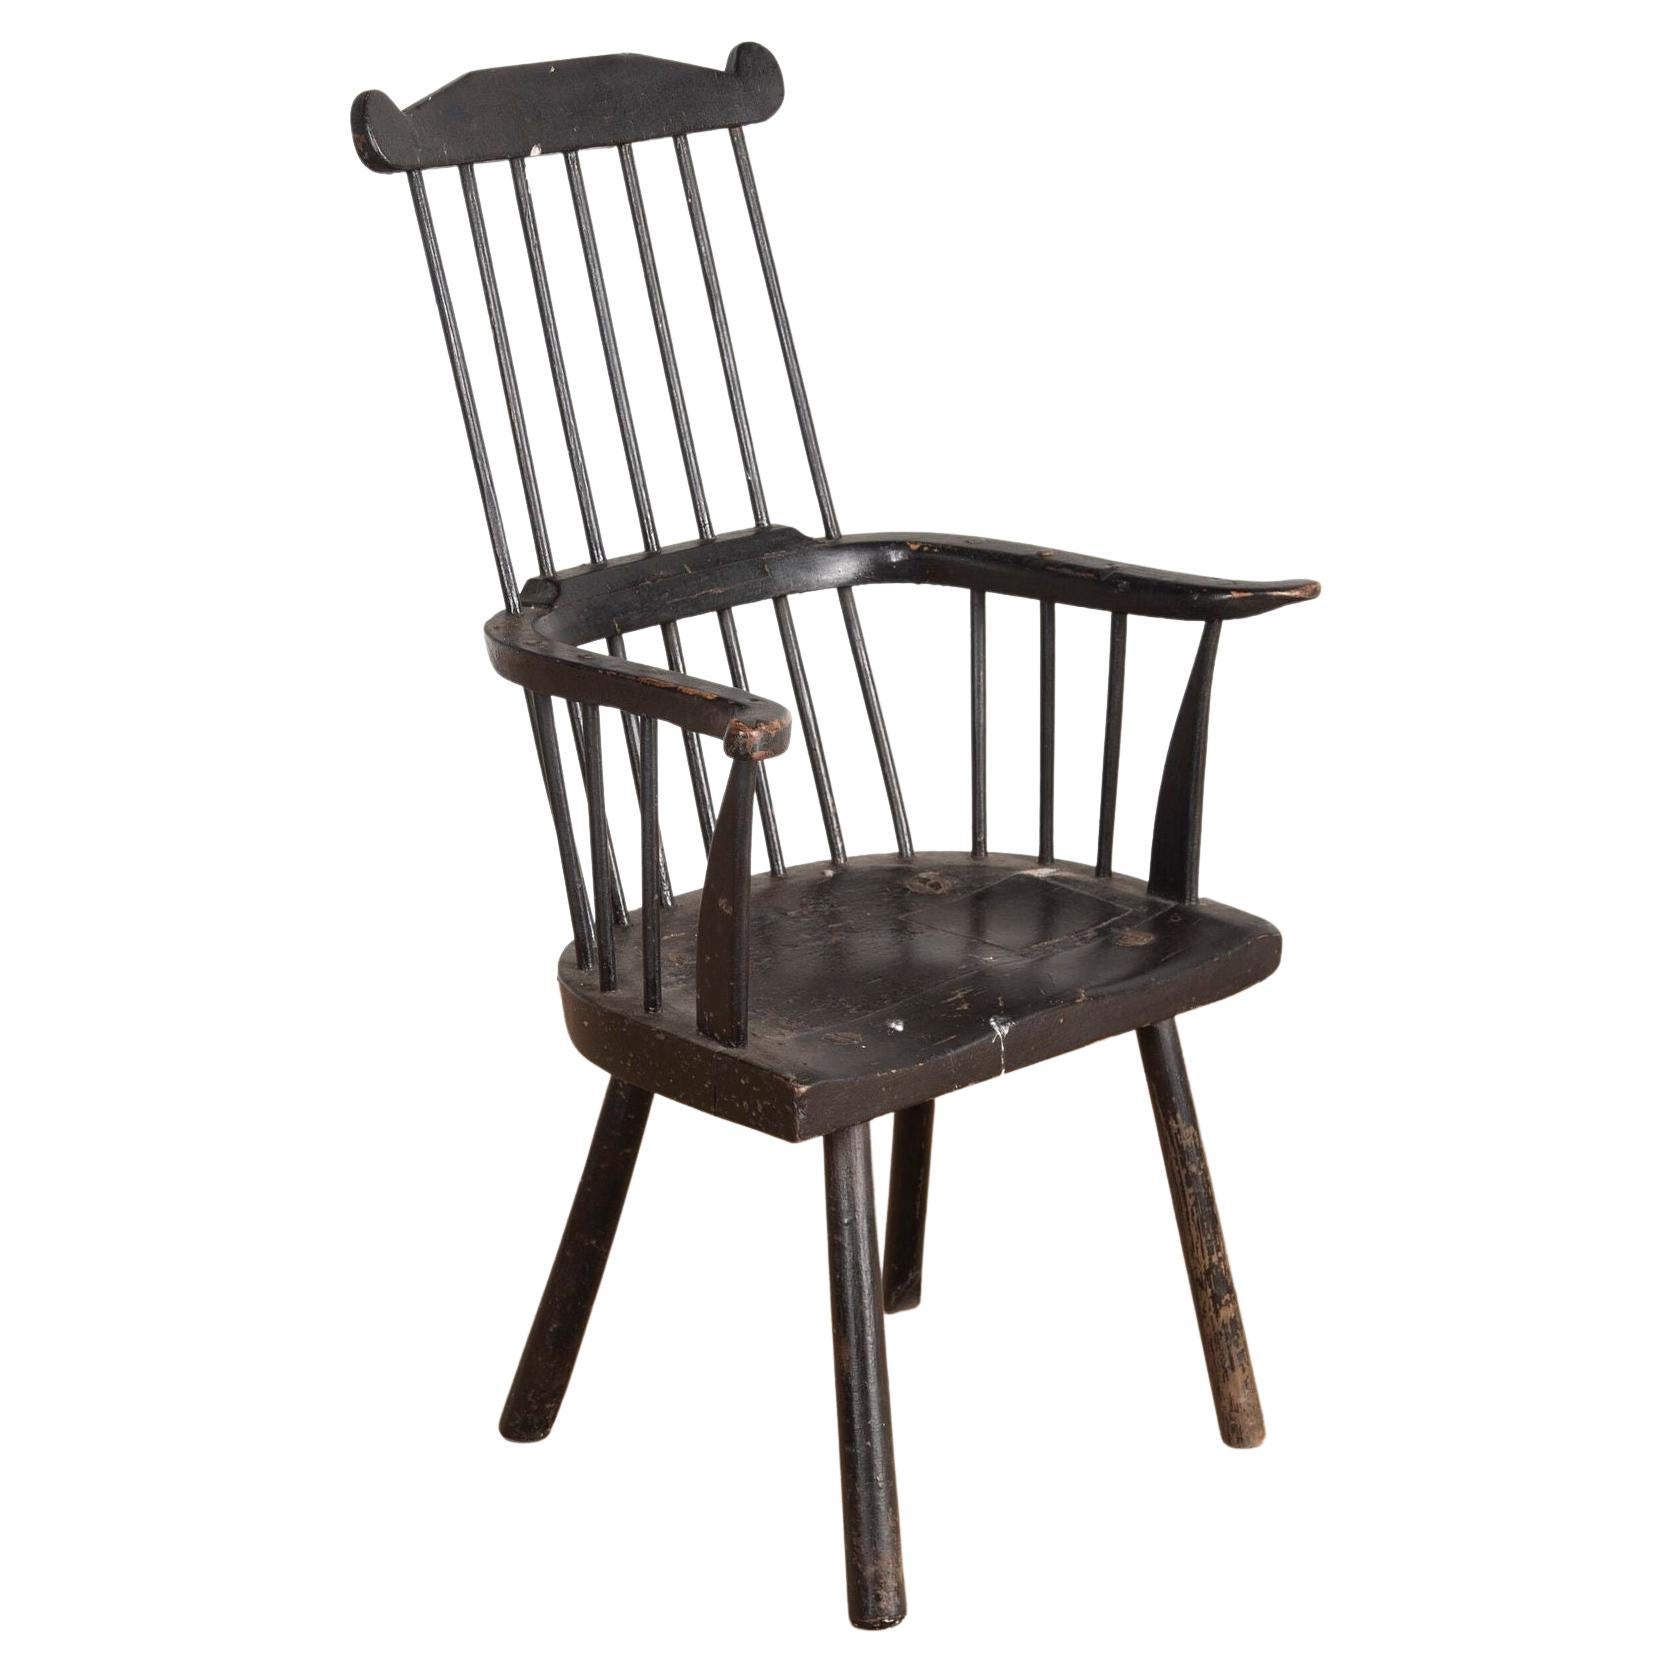 Late 18th Century Welsh Comb-Back Stick Chair